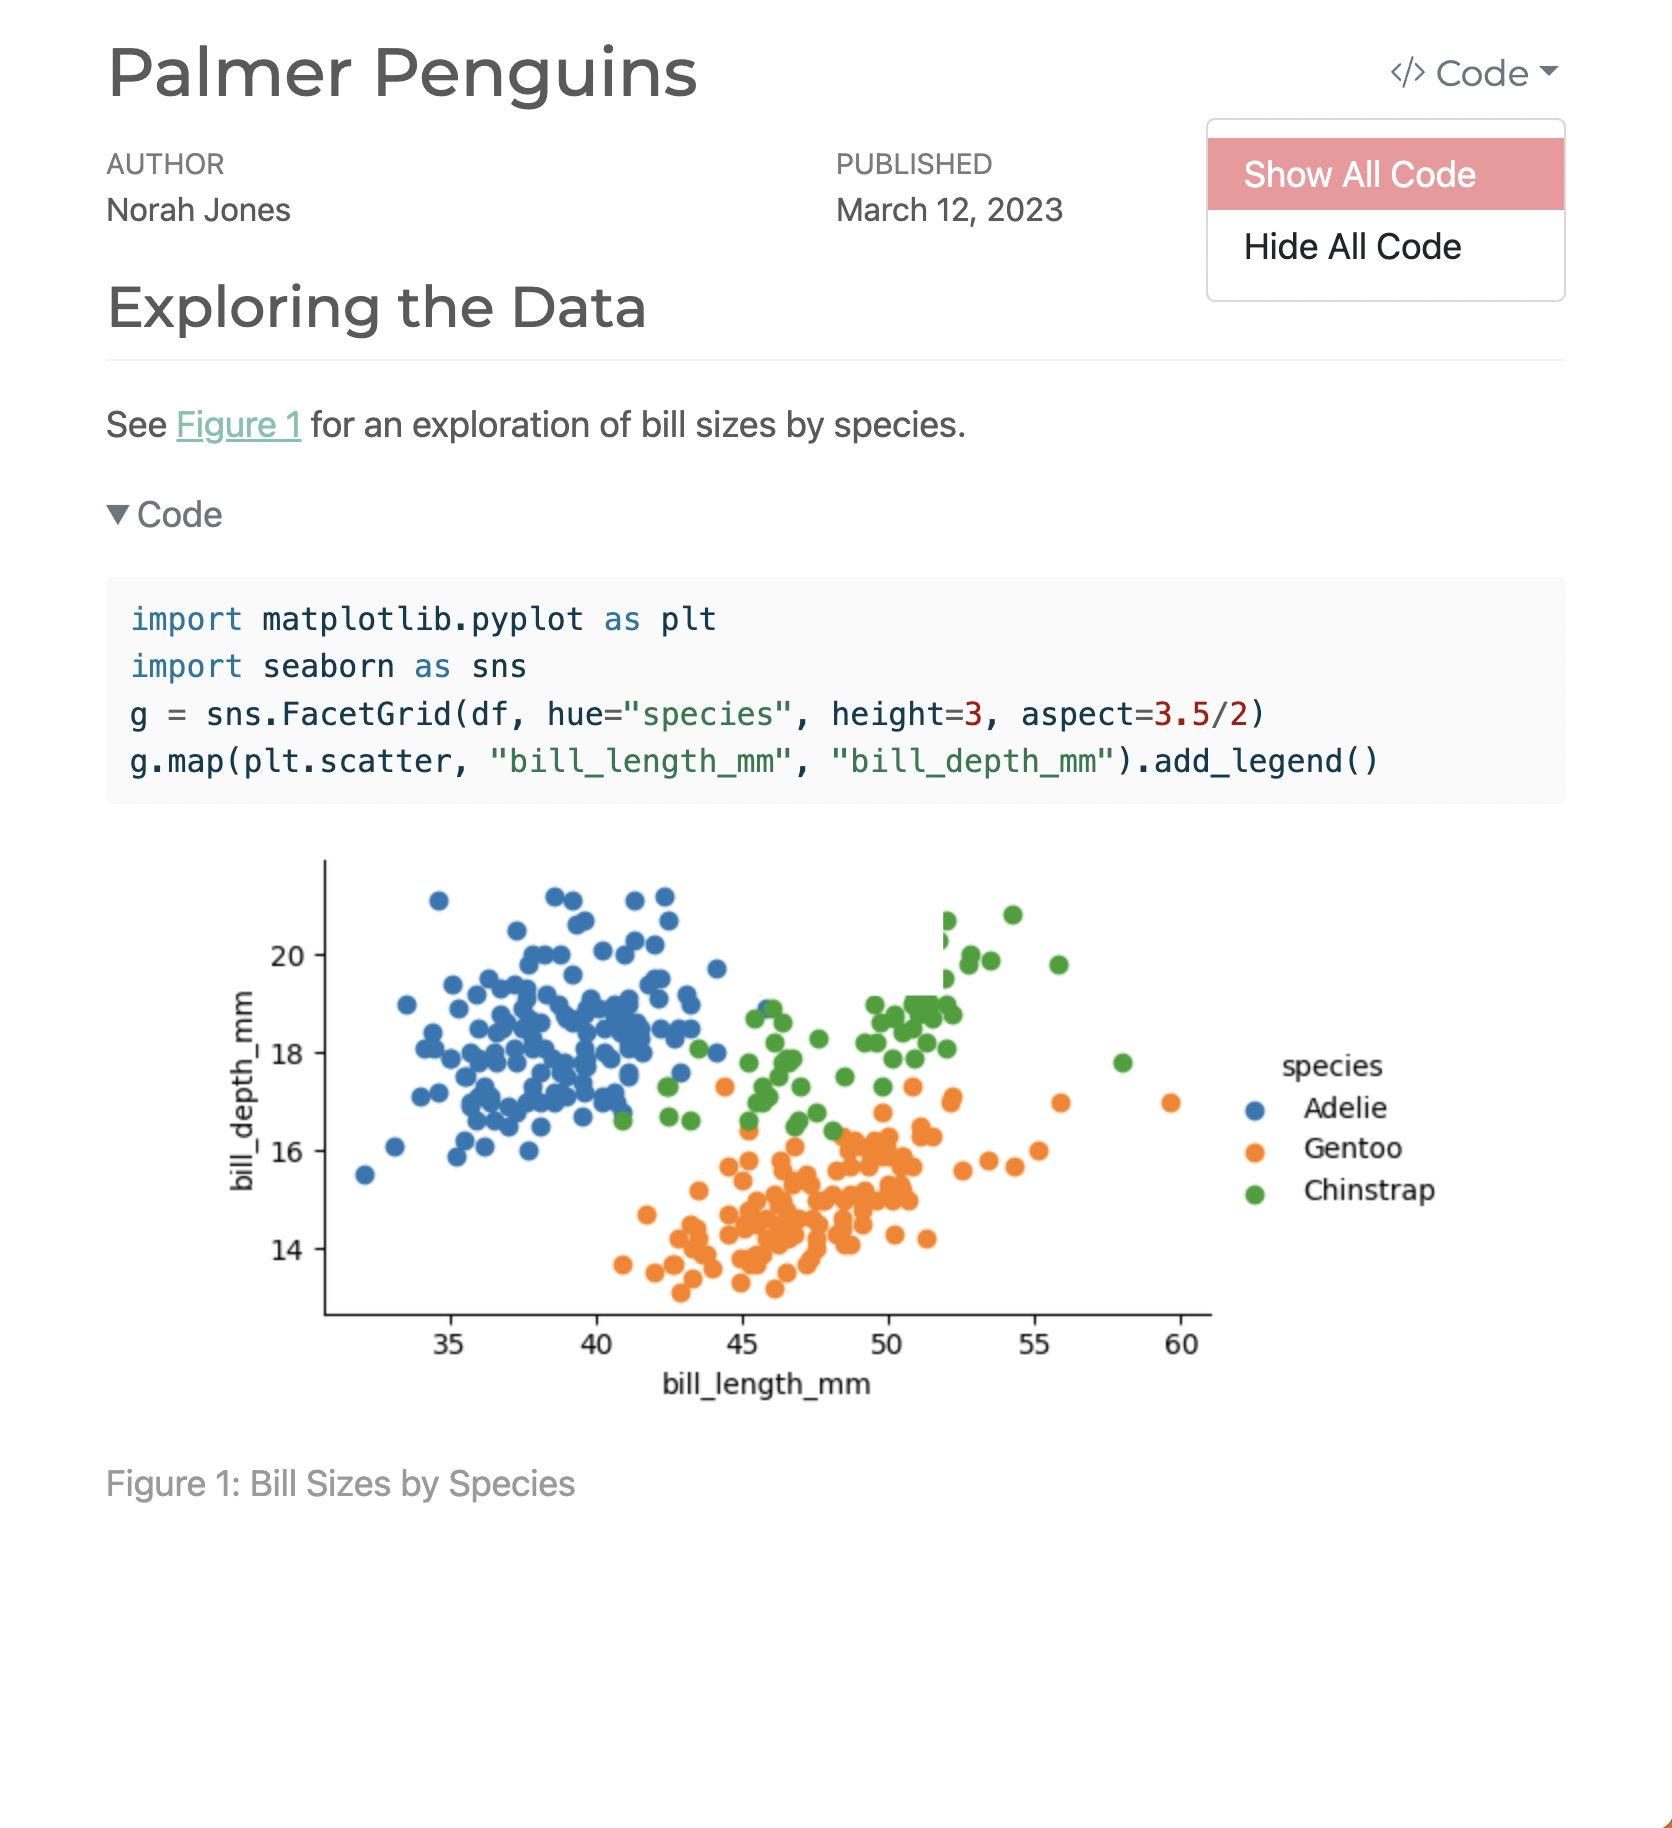 Output of example Jupyter notebook, Palmer Penguins, in HTML showing title, metadata, text, code, and scatterplot. At the top there is a dropdown option to show or hide the code.